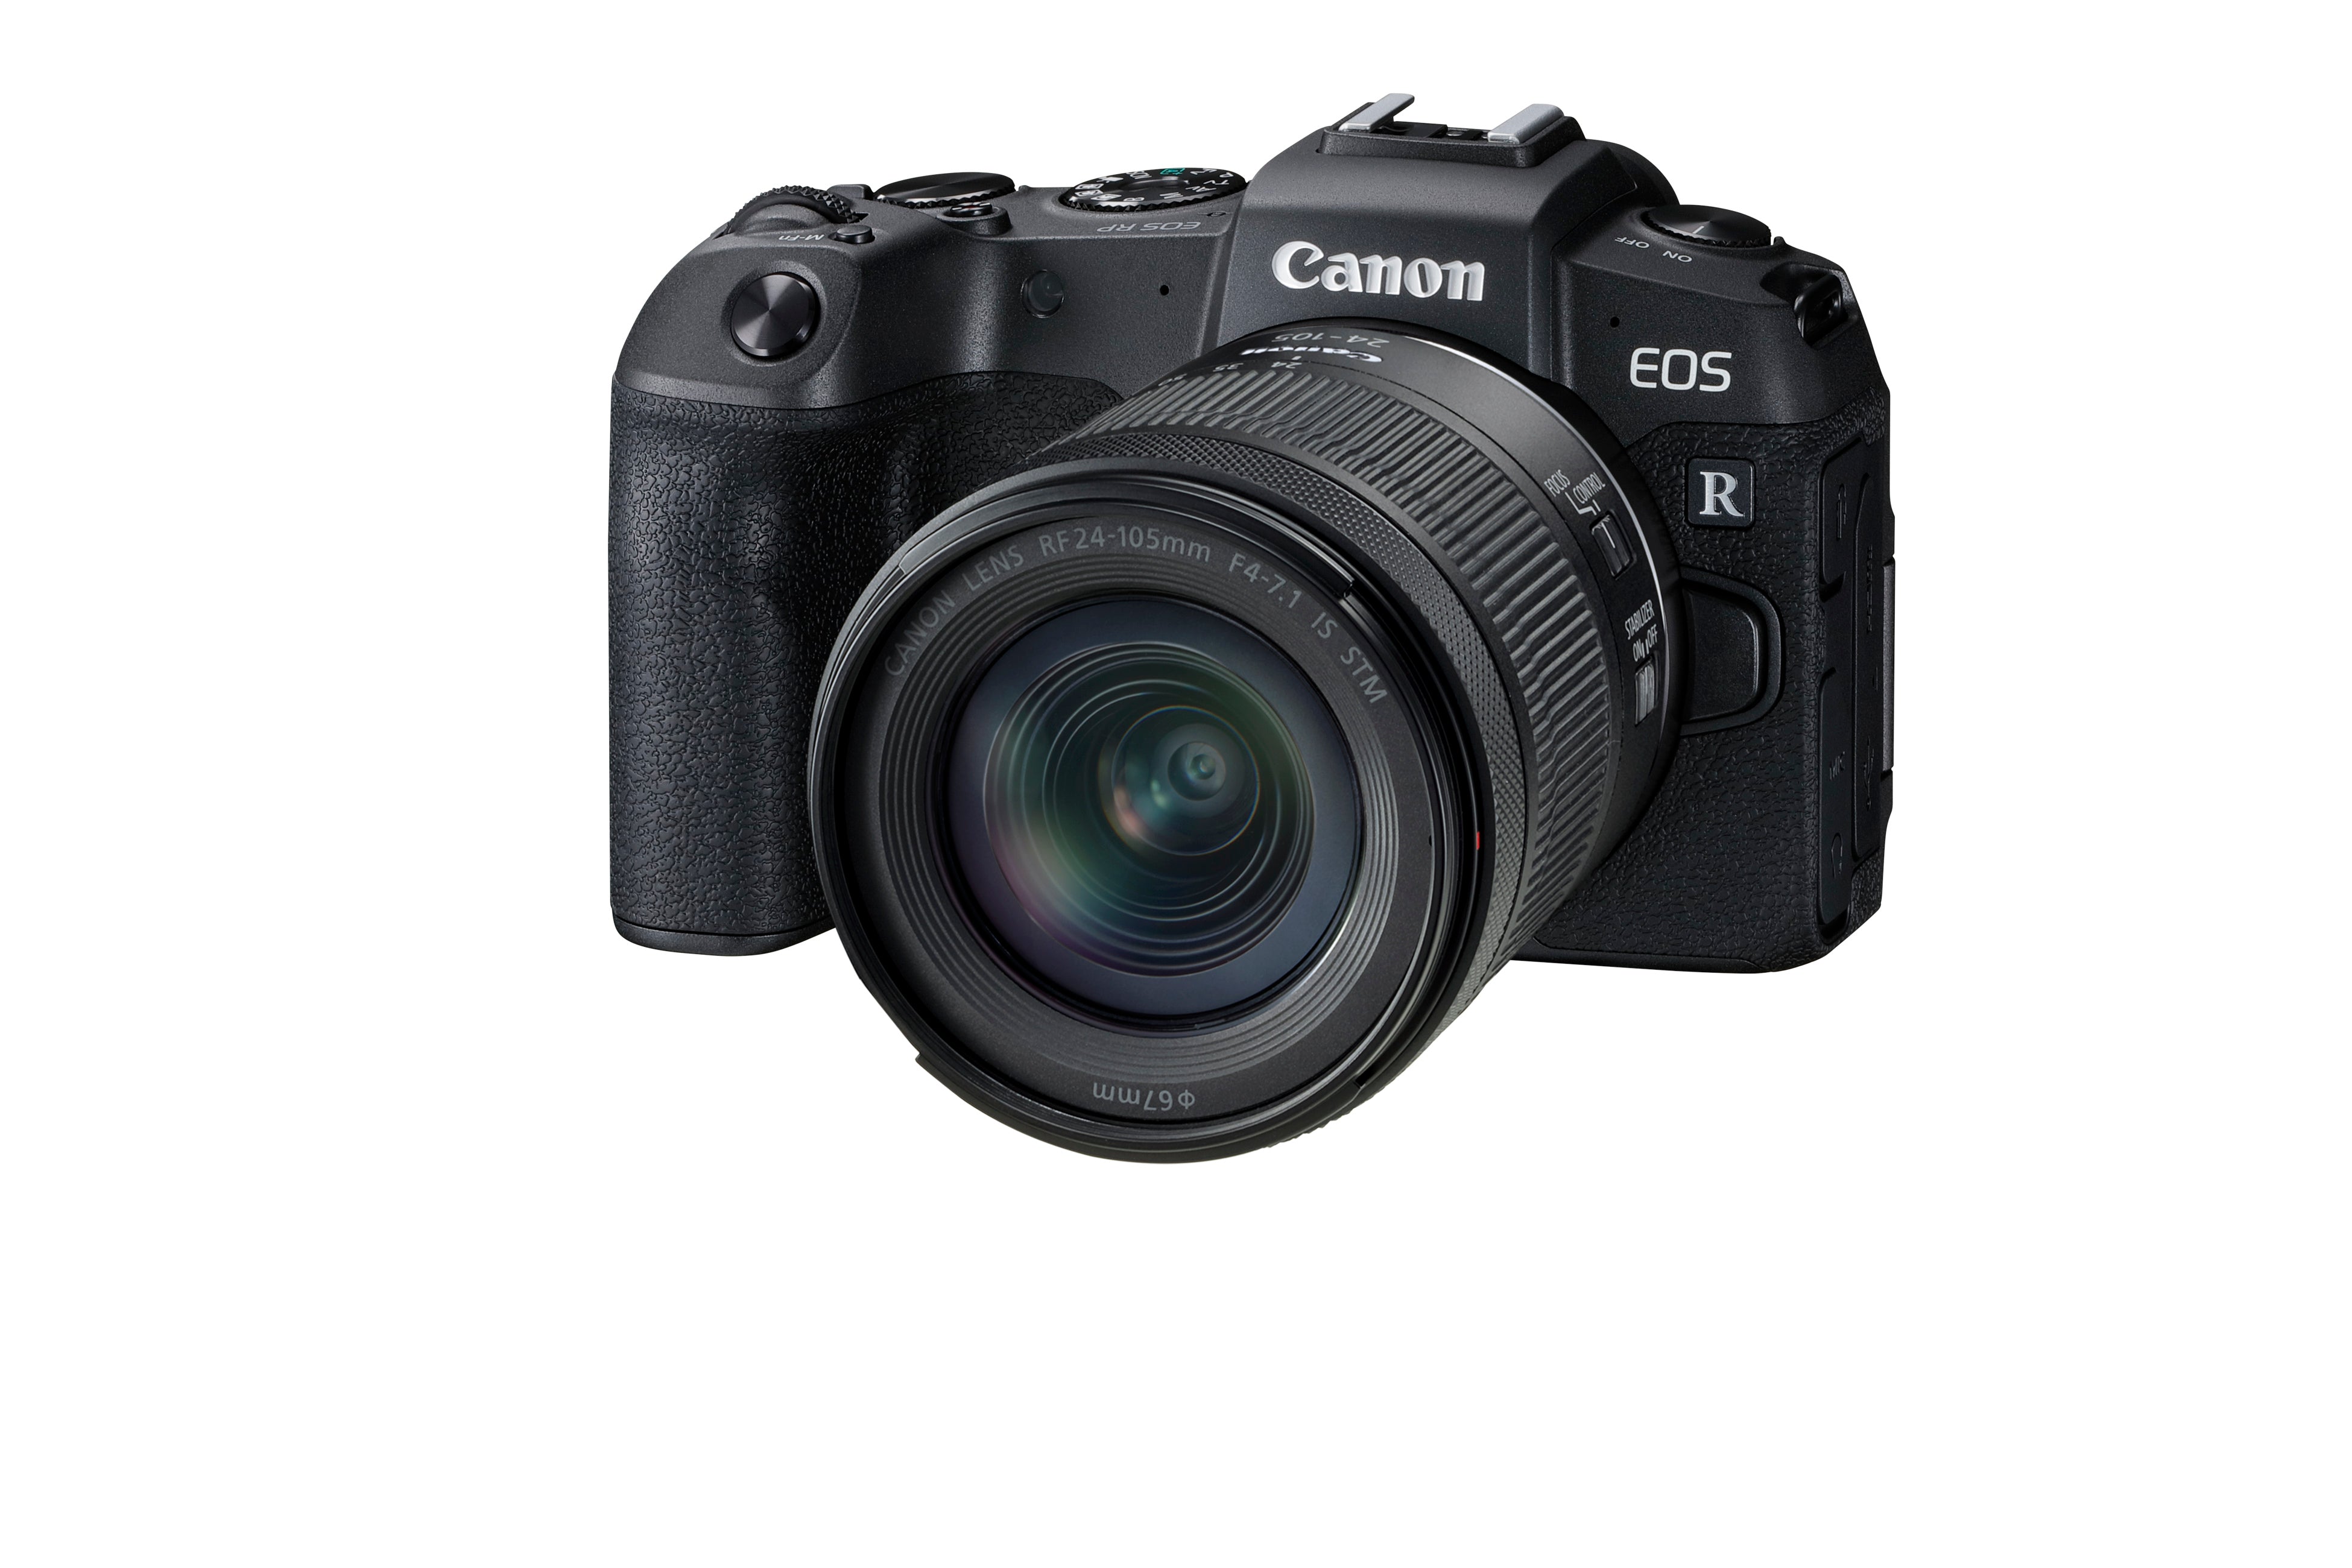 Canon EOS RP Body with 24-105 STM combo kit